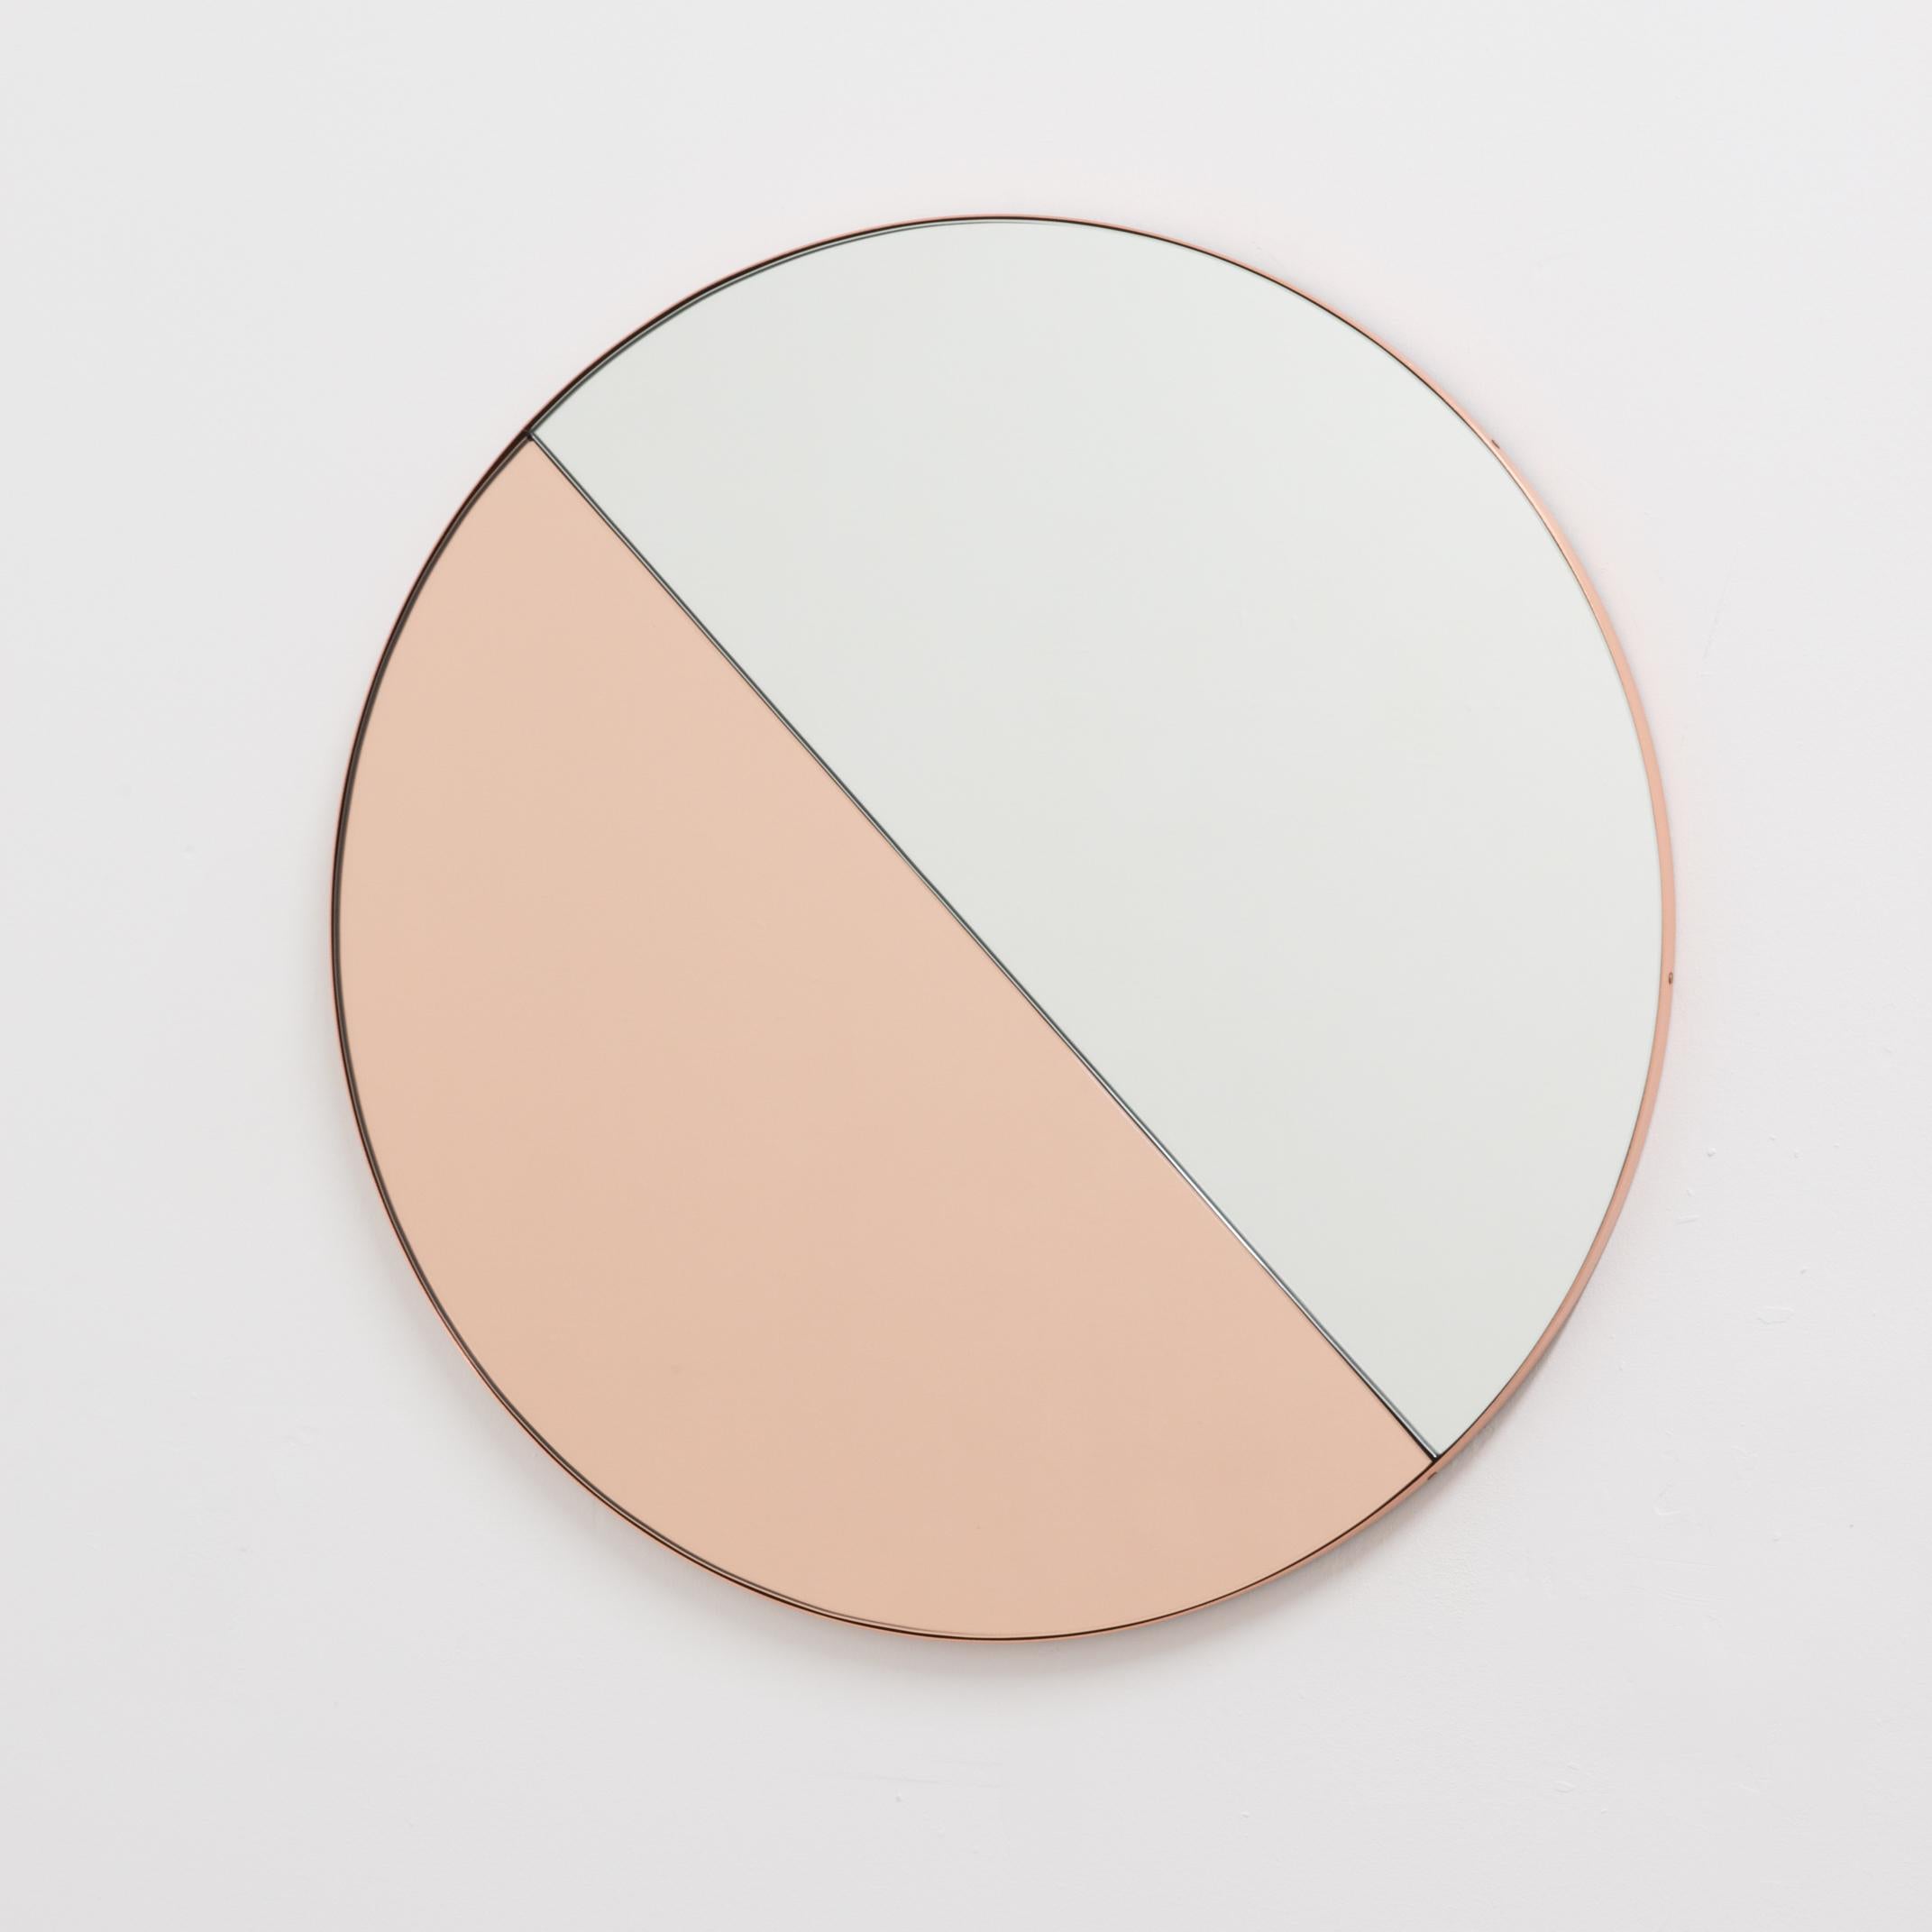 Orbis Dualis Mixed Rose Gold Tint Contemporary Round Mirror, Copper Frame, Small For Sale 5